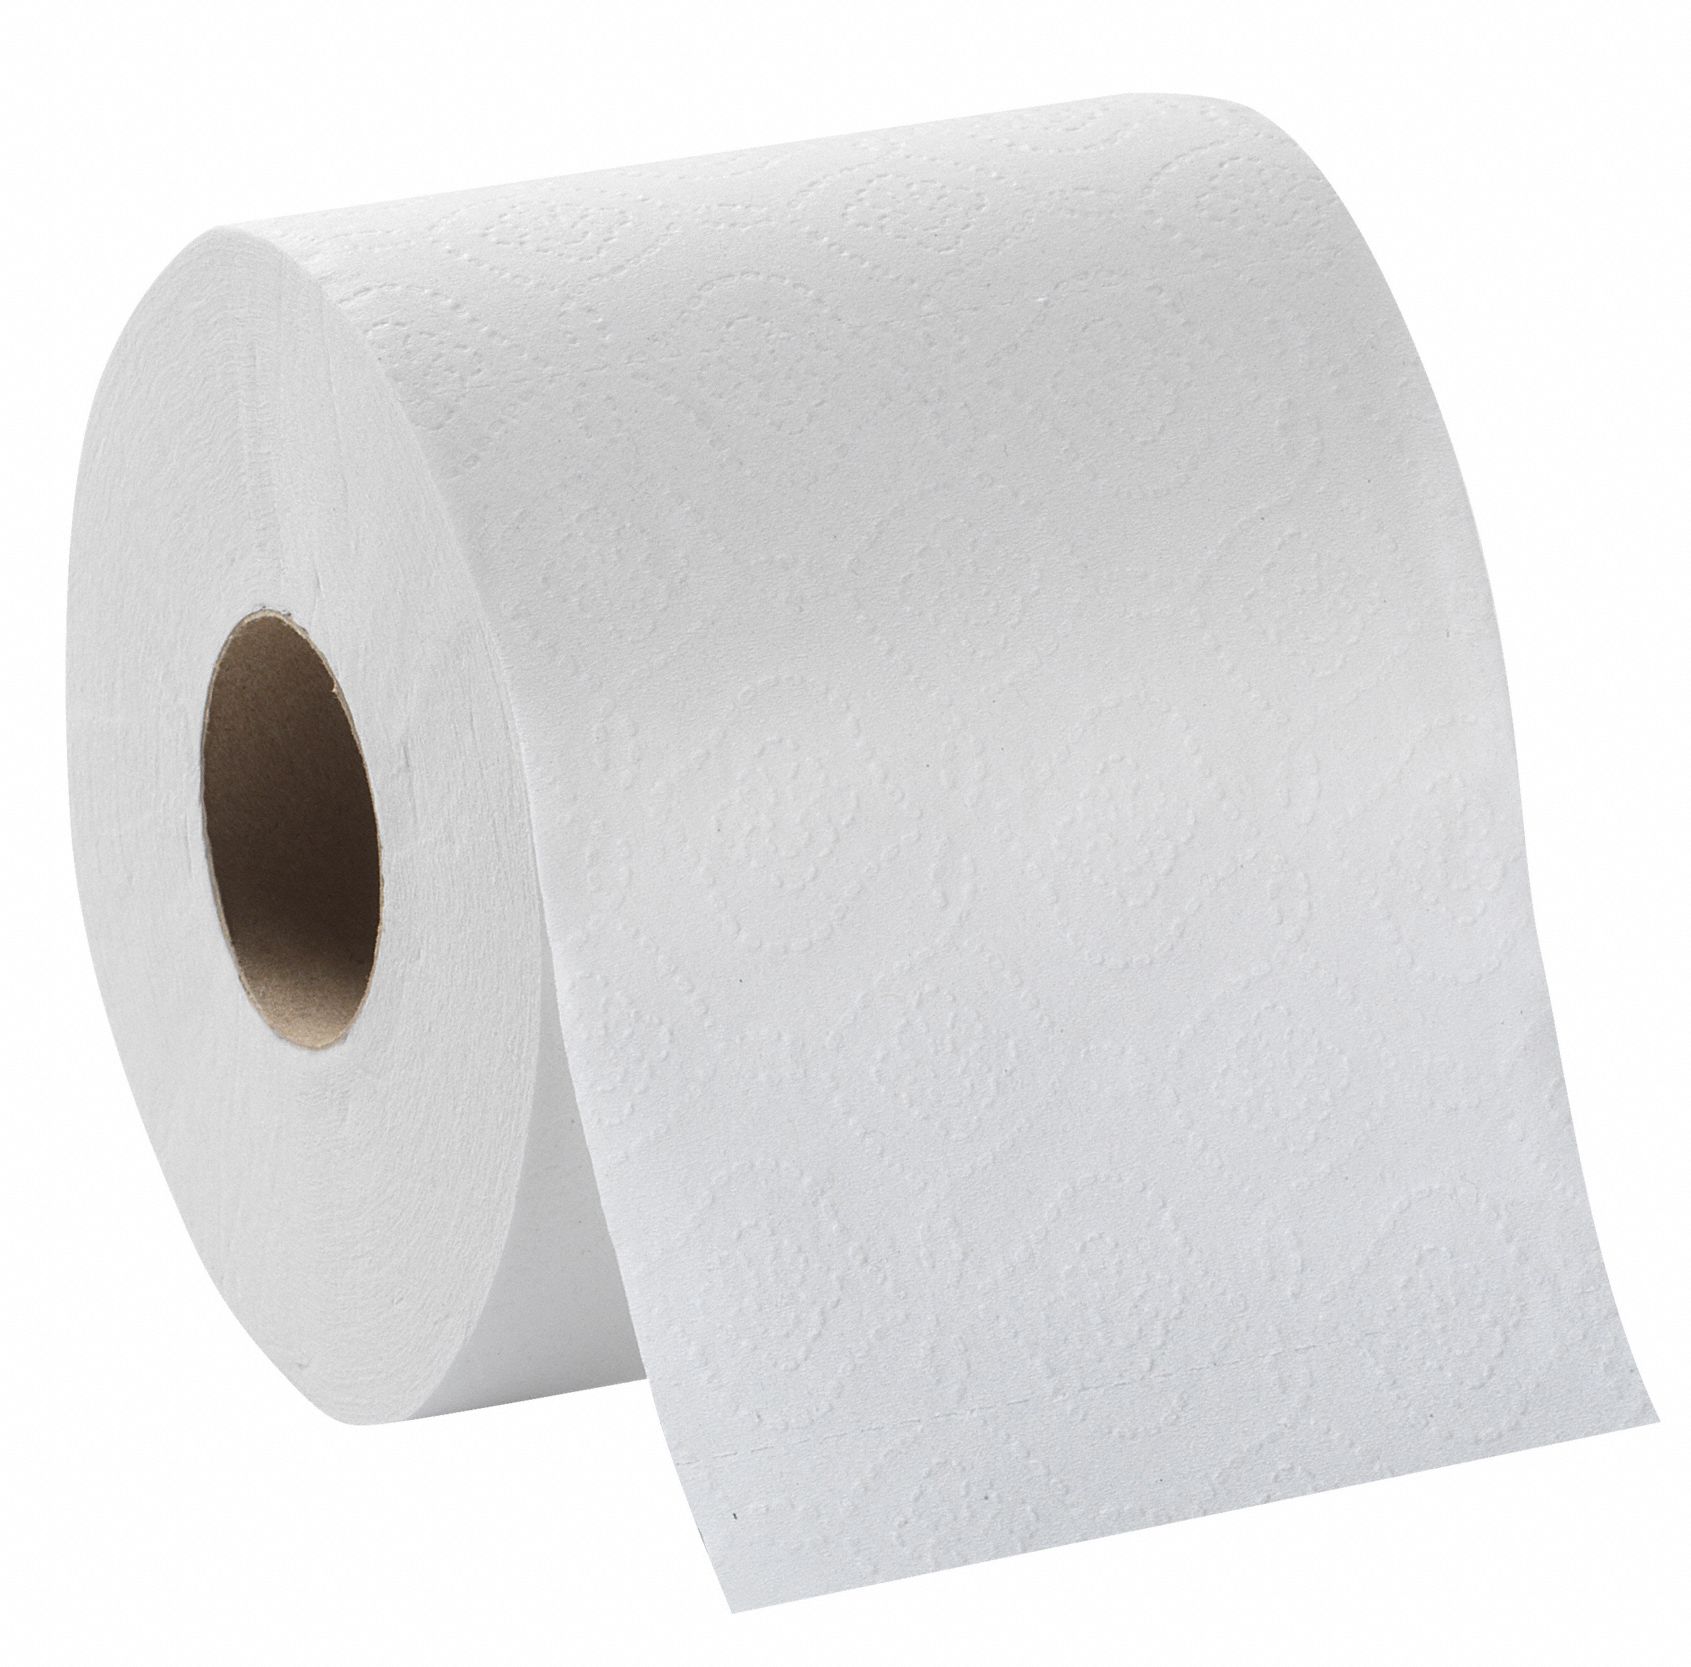 Albums 94+ Pictures Pictures Of Toilet Paper Sharp